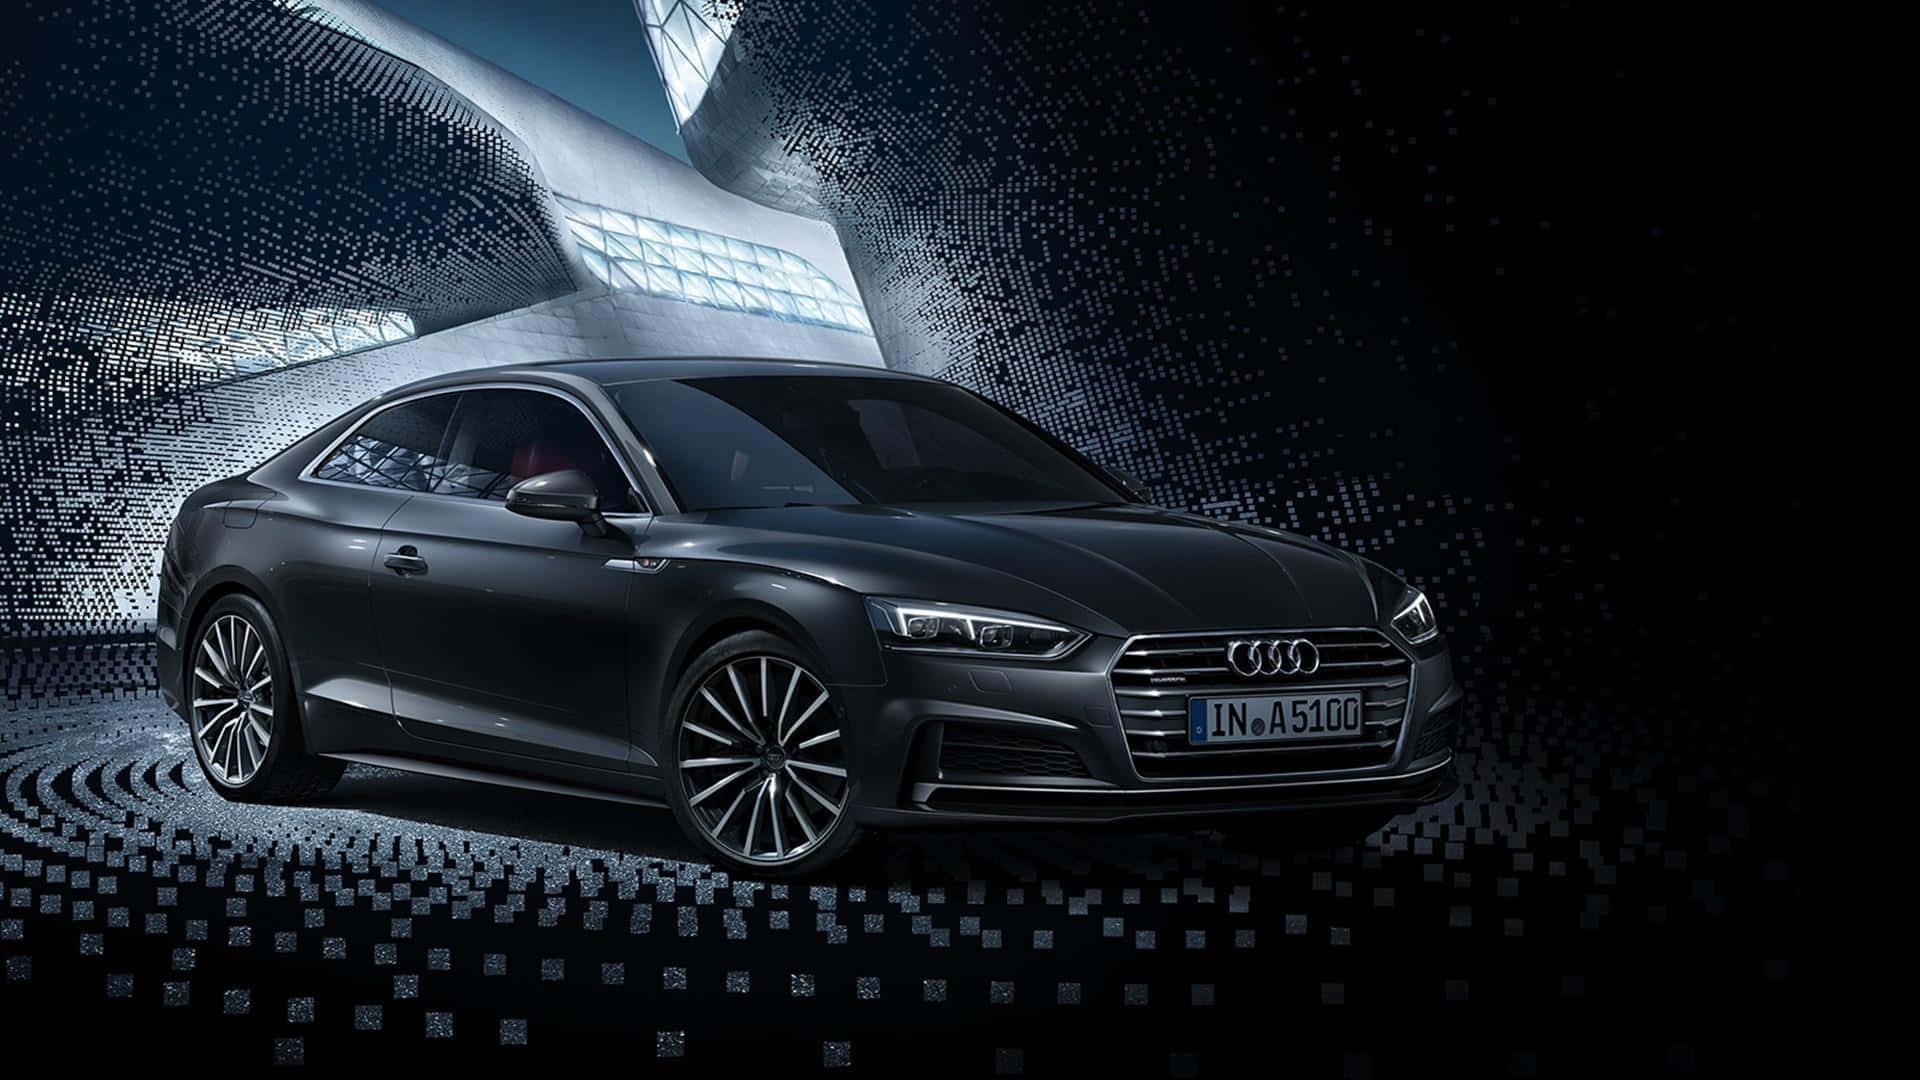 Sleek and Sophisticated Audi A5 on the Open Road Wallpaper